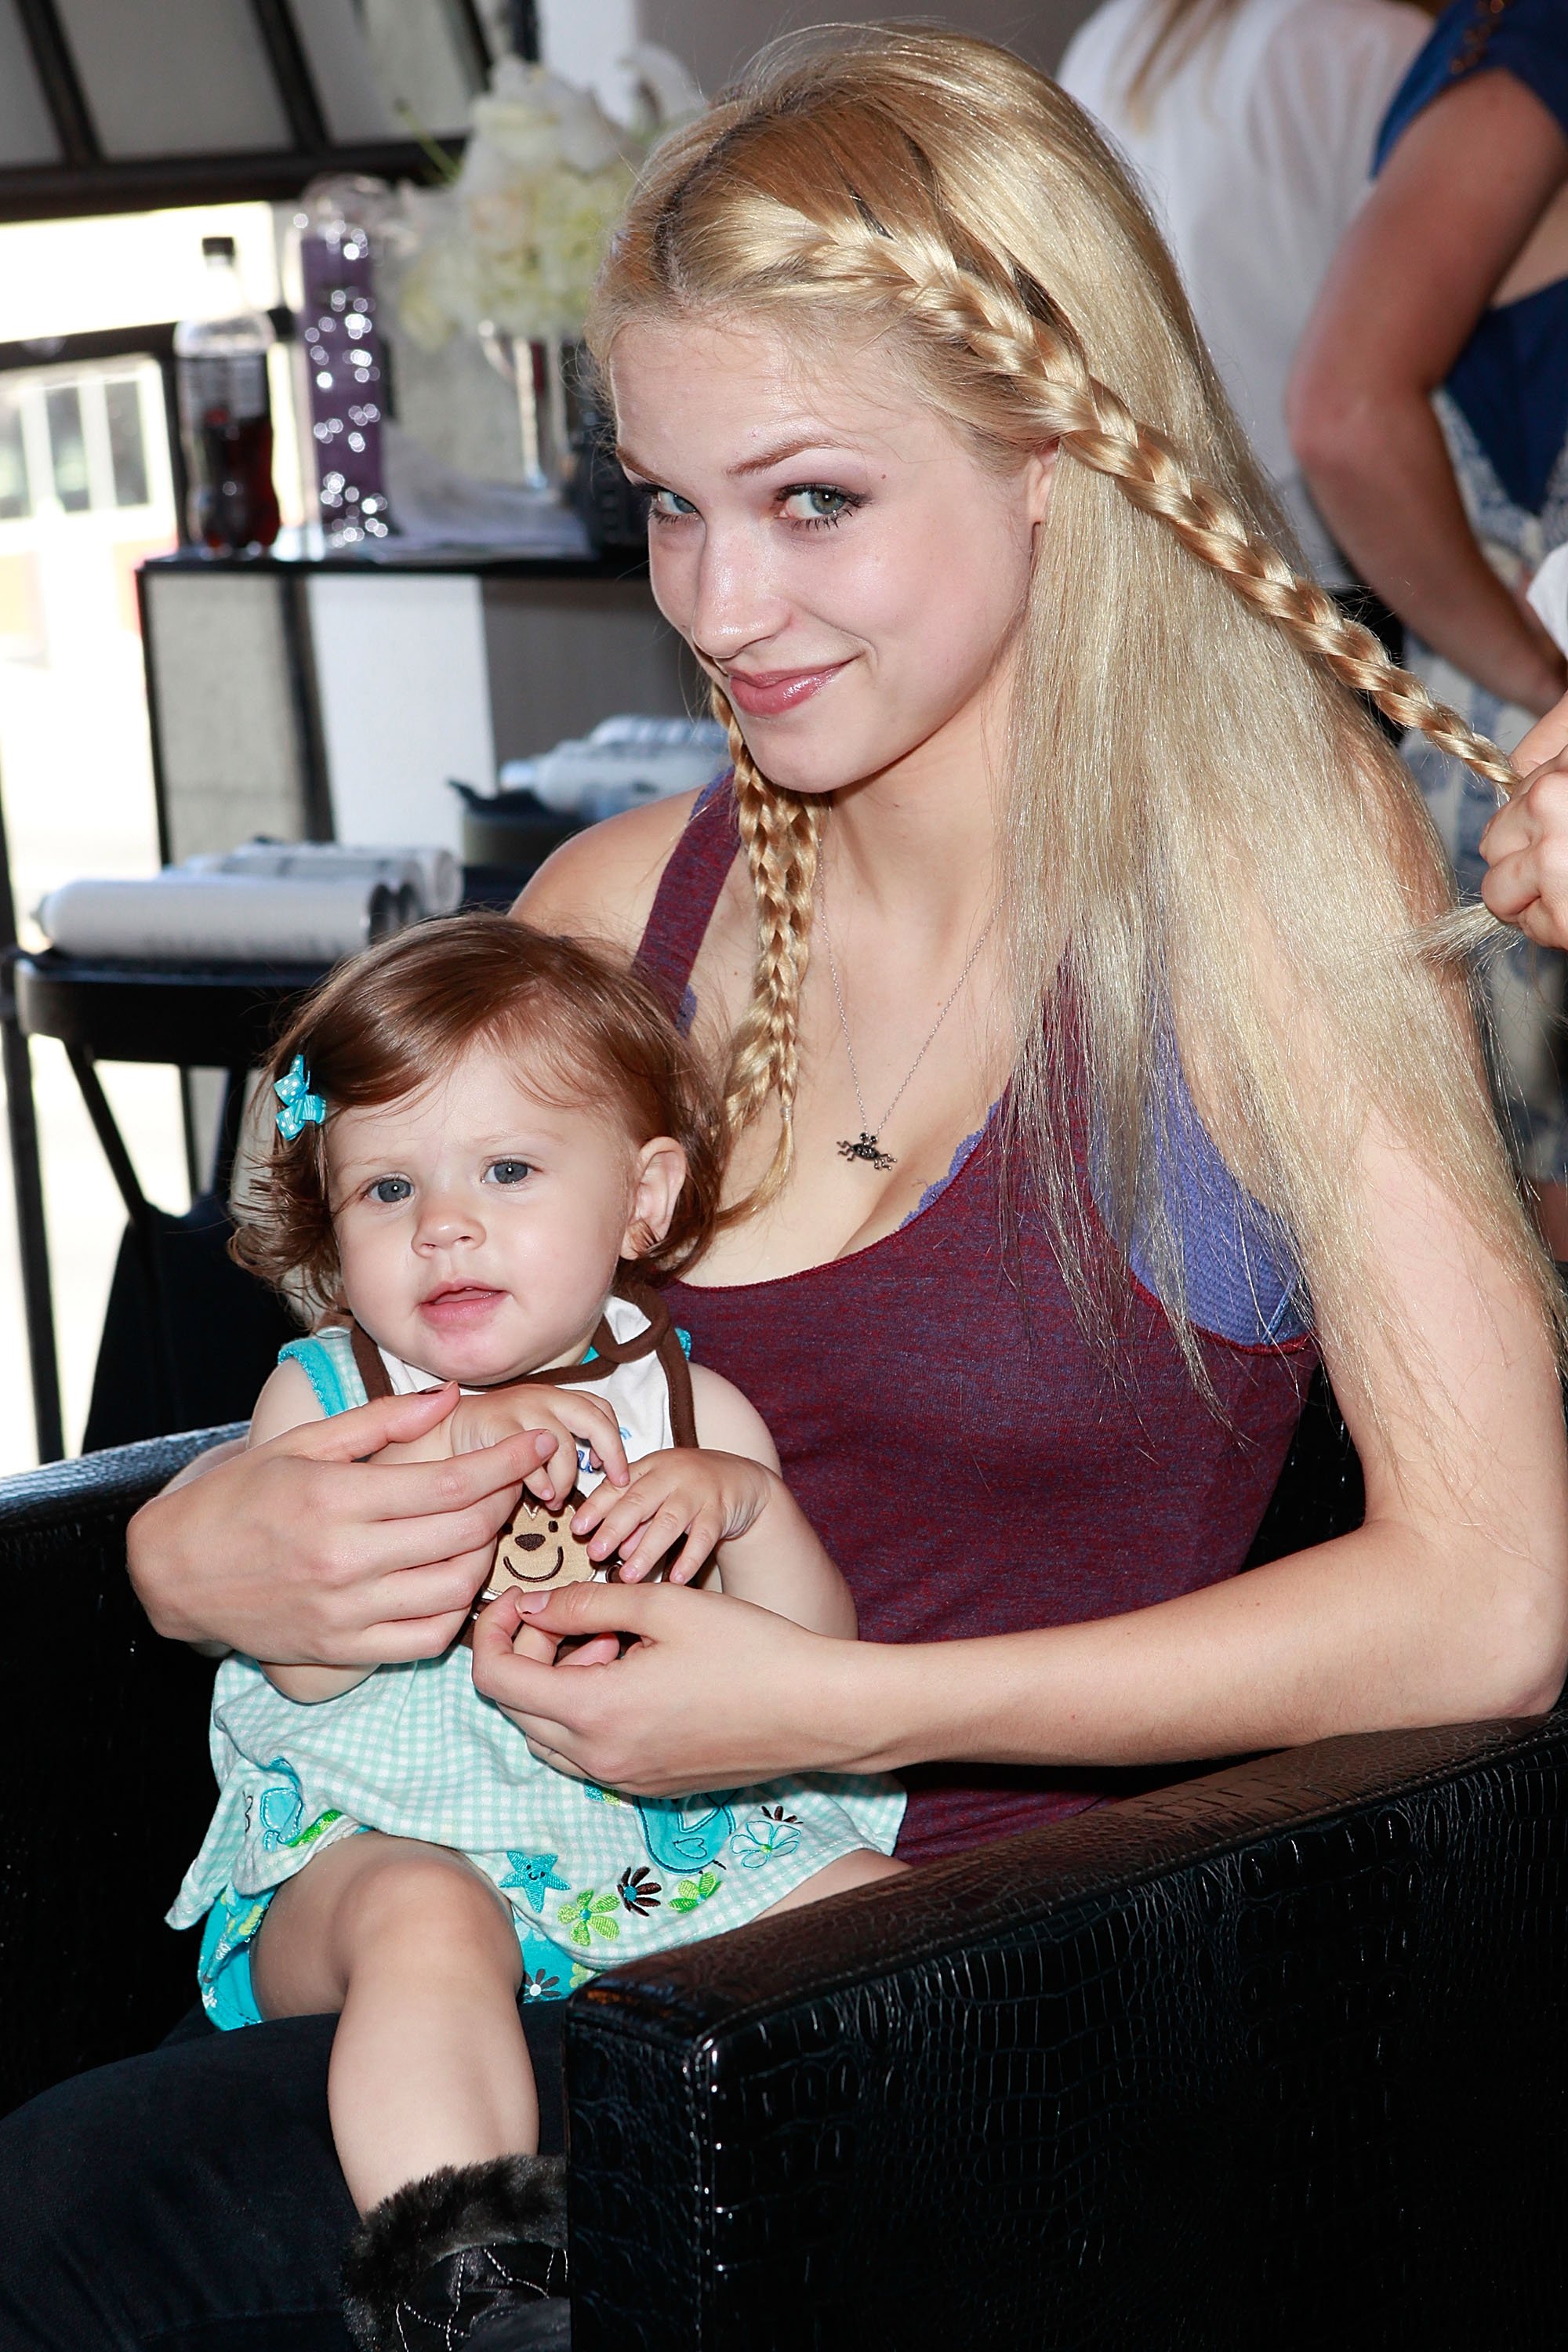 Alexis Knapp and daughter Kailani attend the Colgate Optic White Beauty Bar at Nine Zero One Salon With Skintimate, Fake Bake And Cetaphil, Produced by BMF Media on June 2, 2012 in West Hollywood, California. | Source: Getty Images